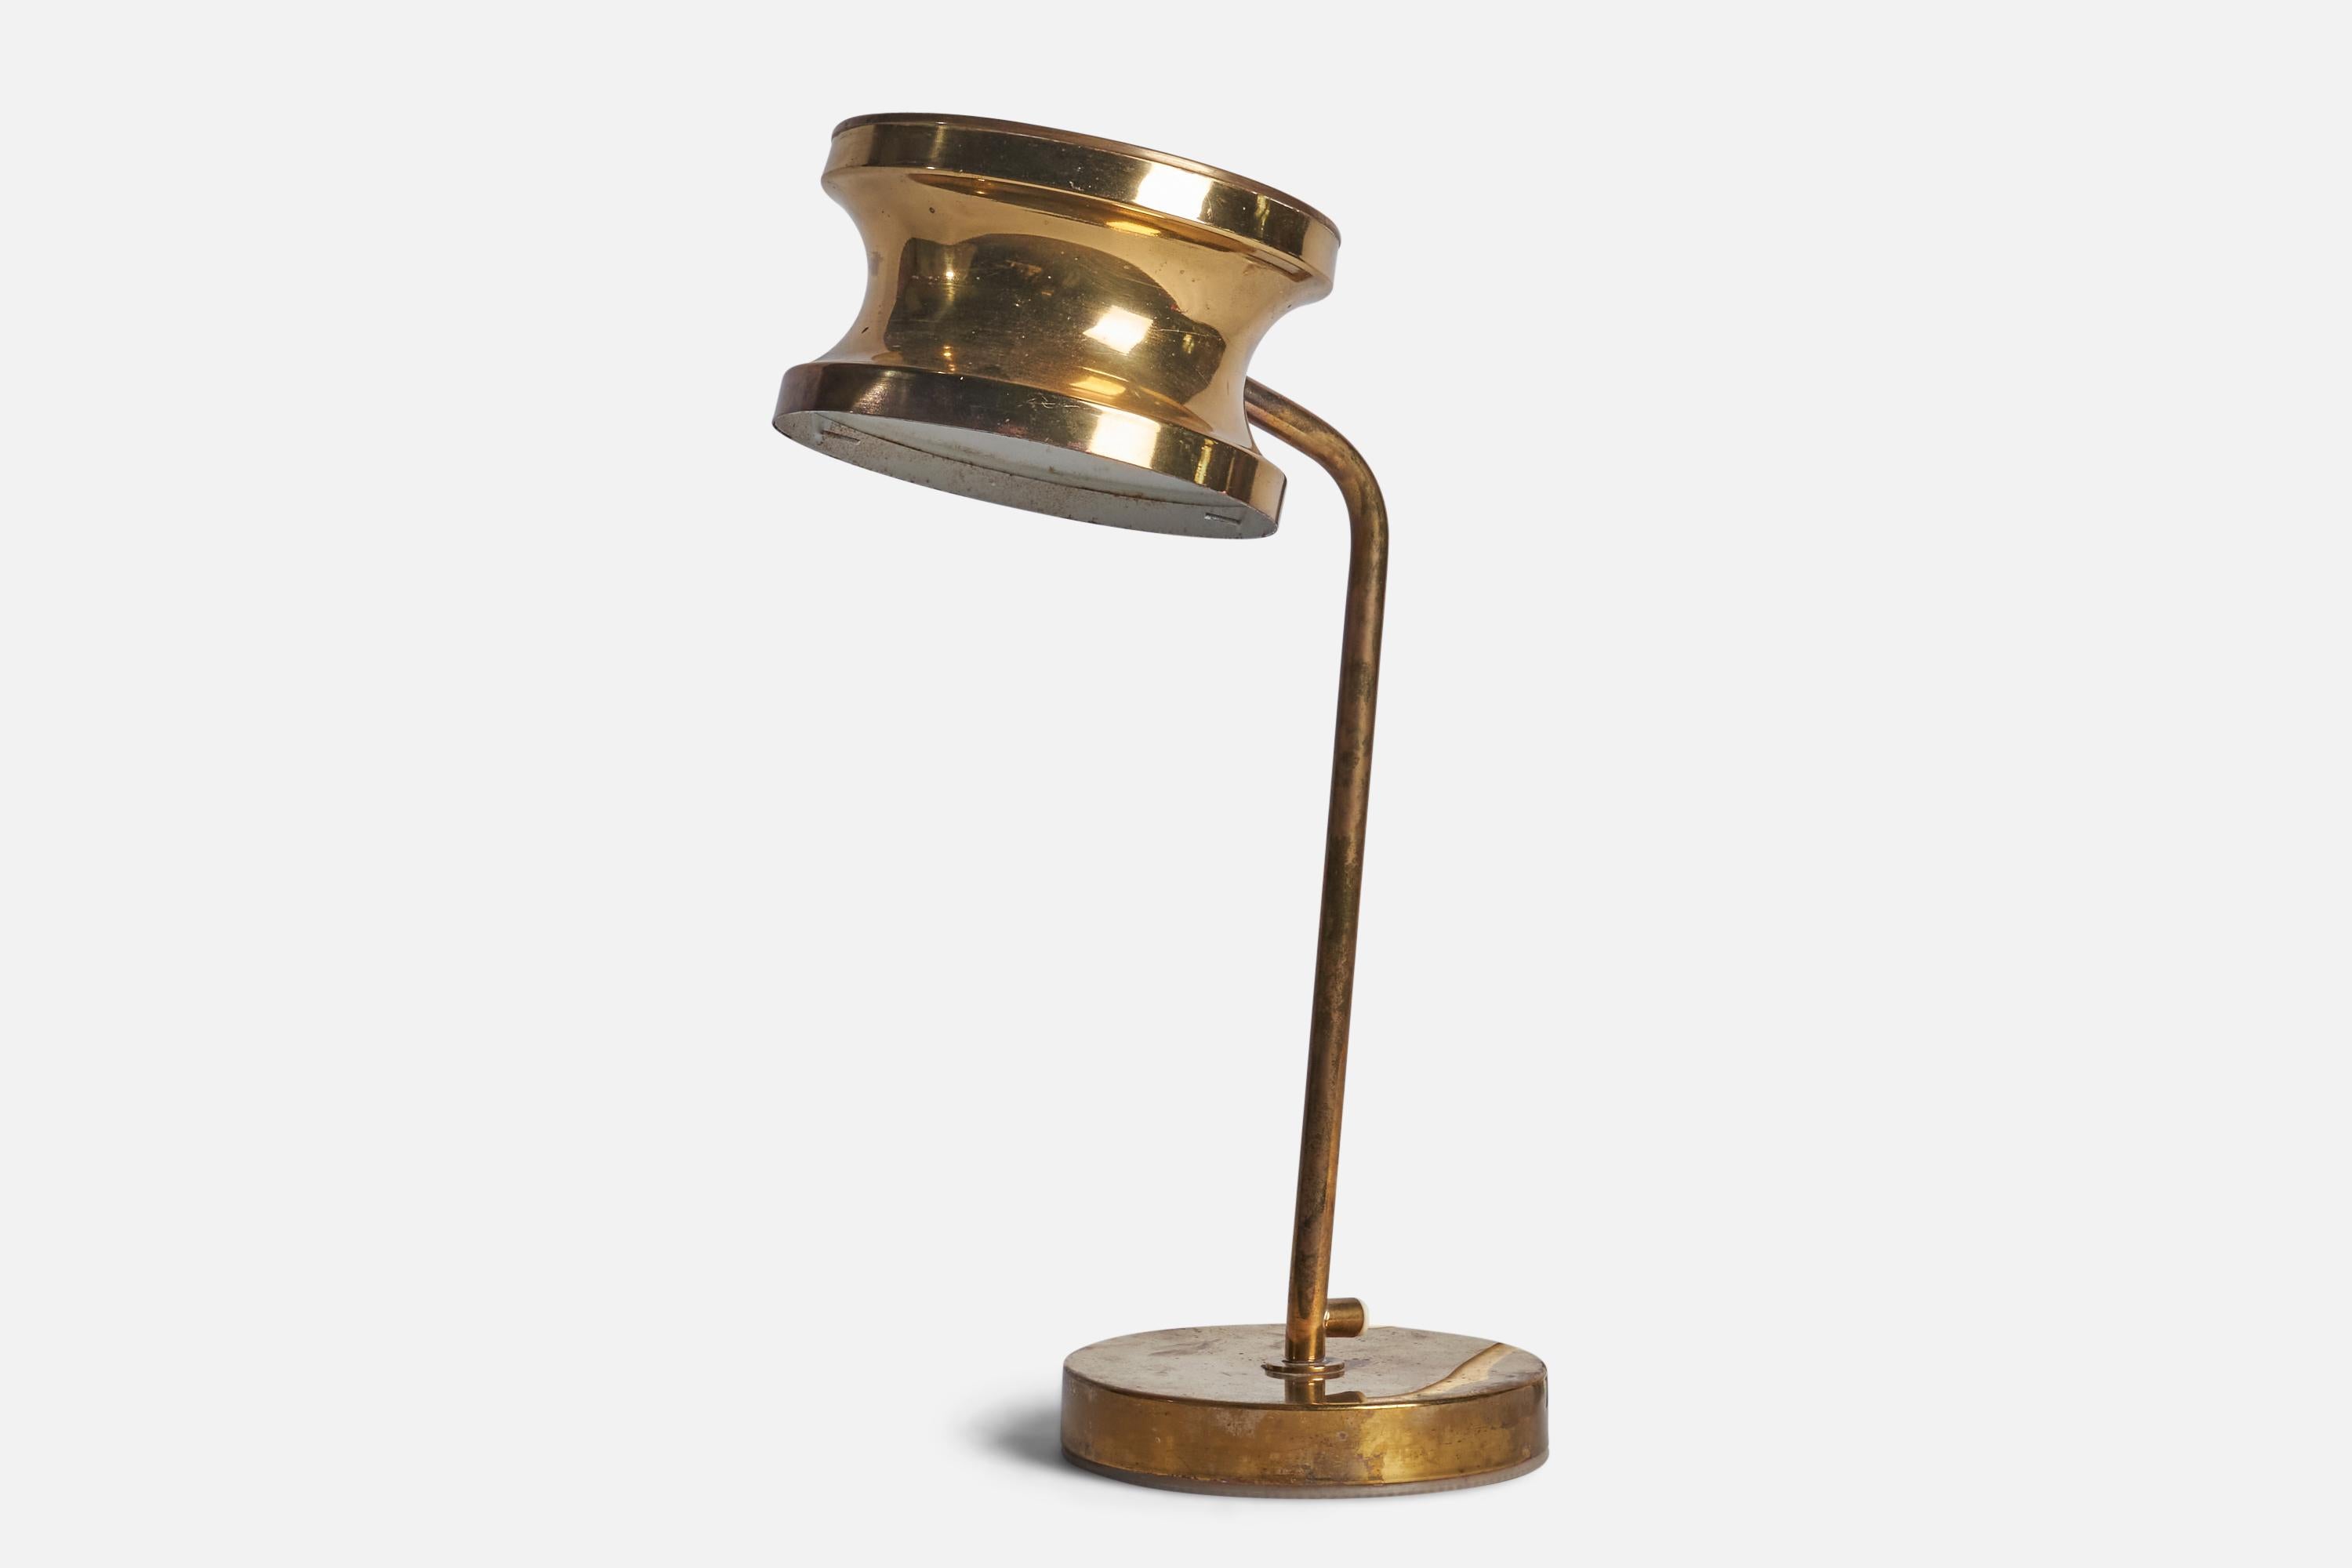 A brass table lamp designed and produced by Tyringe Konsthantverk, Sweden, c. 1970s.
Overall Dimensions (inches): 16.5” H x 8